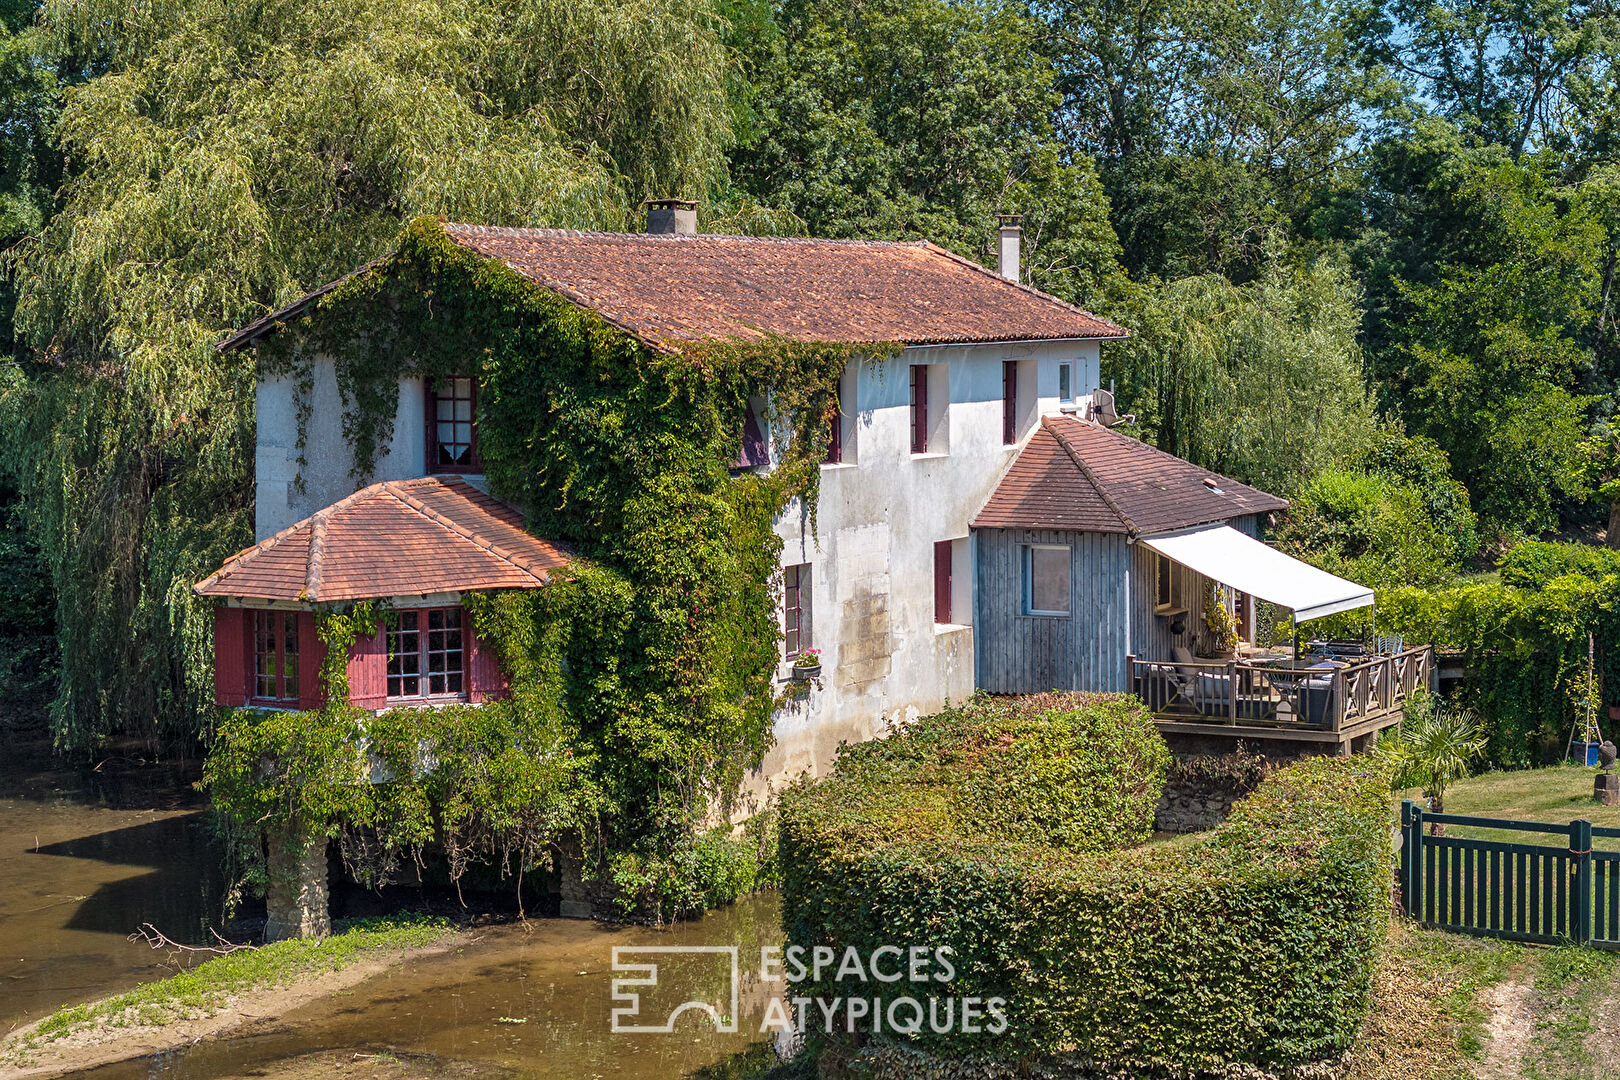 17th century mill in Périgord, a setting of serenity and elegance